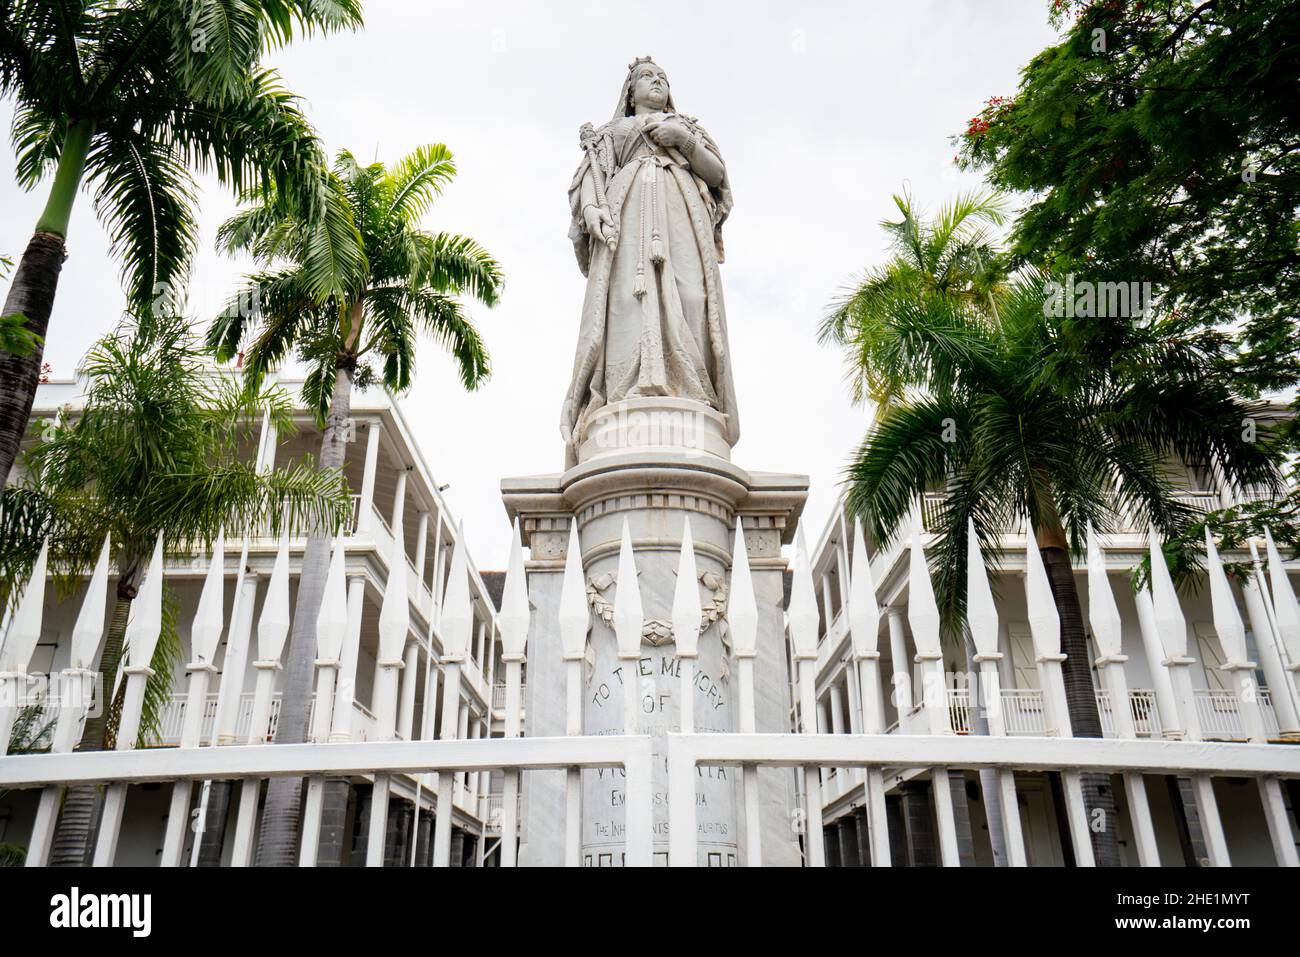 Government House in Port Louis, the capital city of Mauritius. Built by the French in a colonial style, the British put up a statue of Queen Victoria Stock Photo